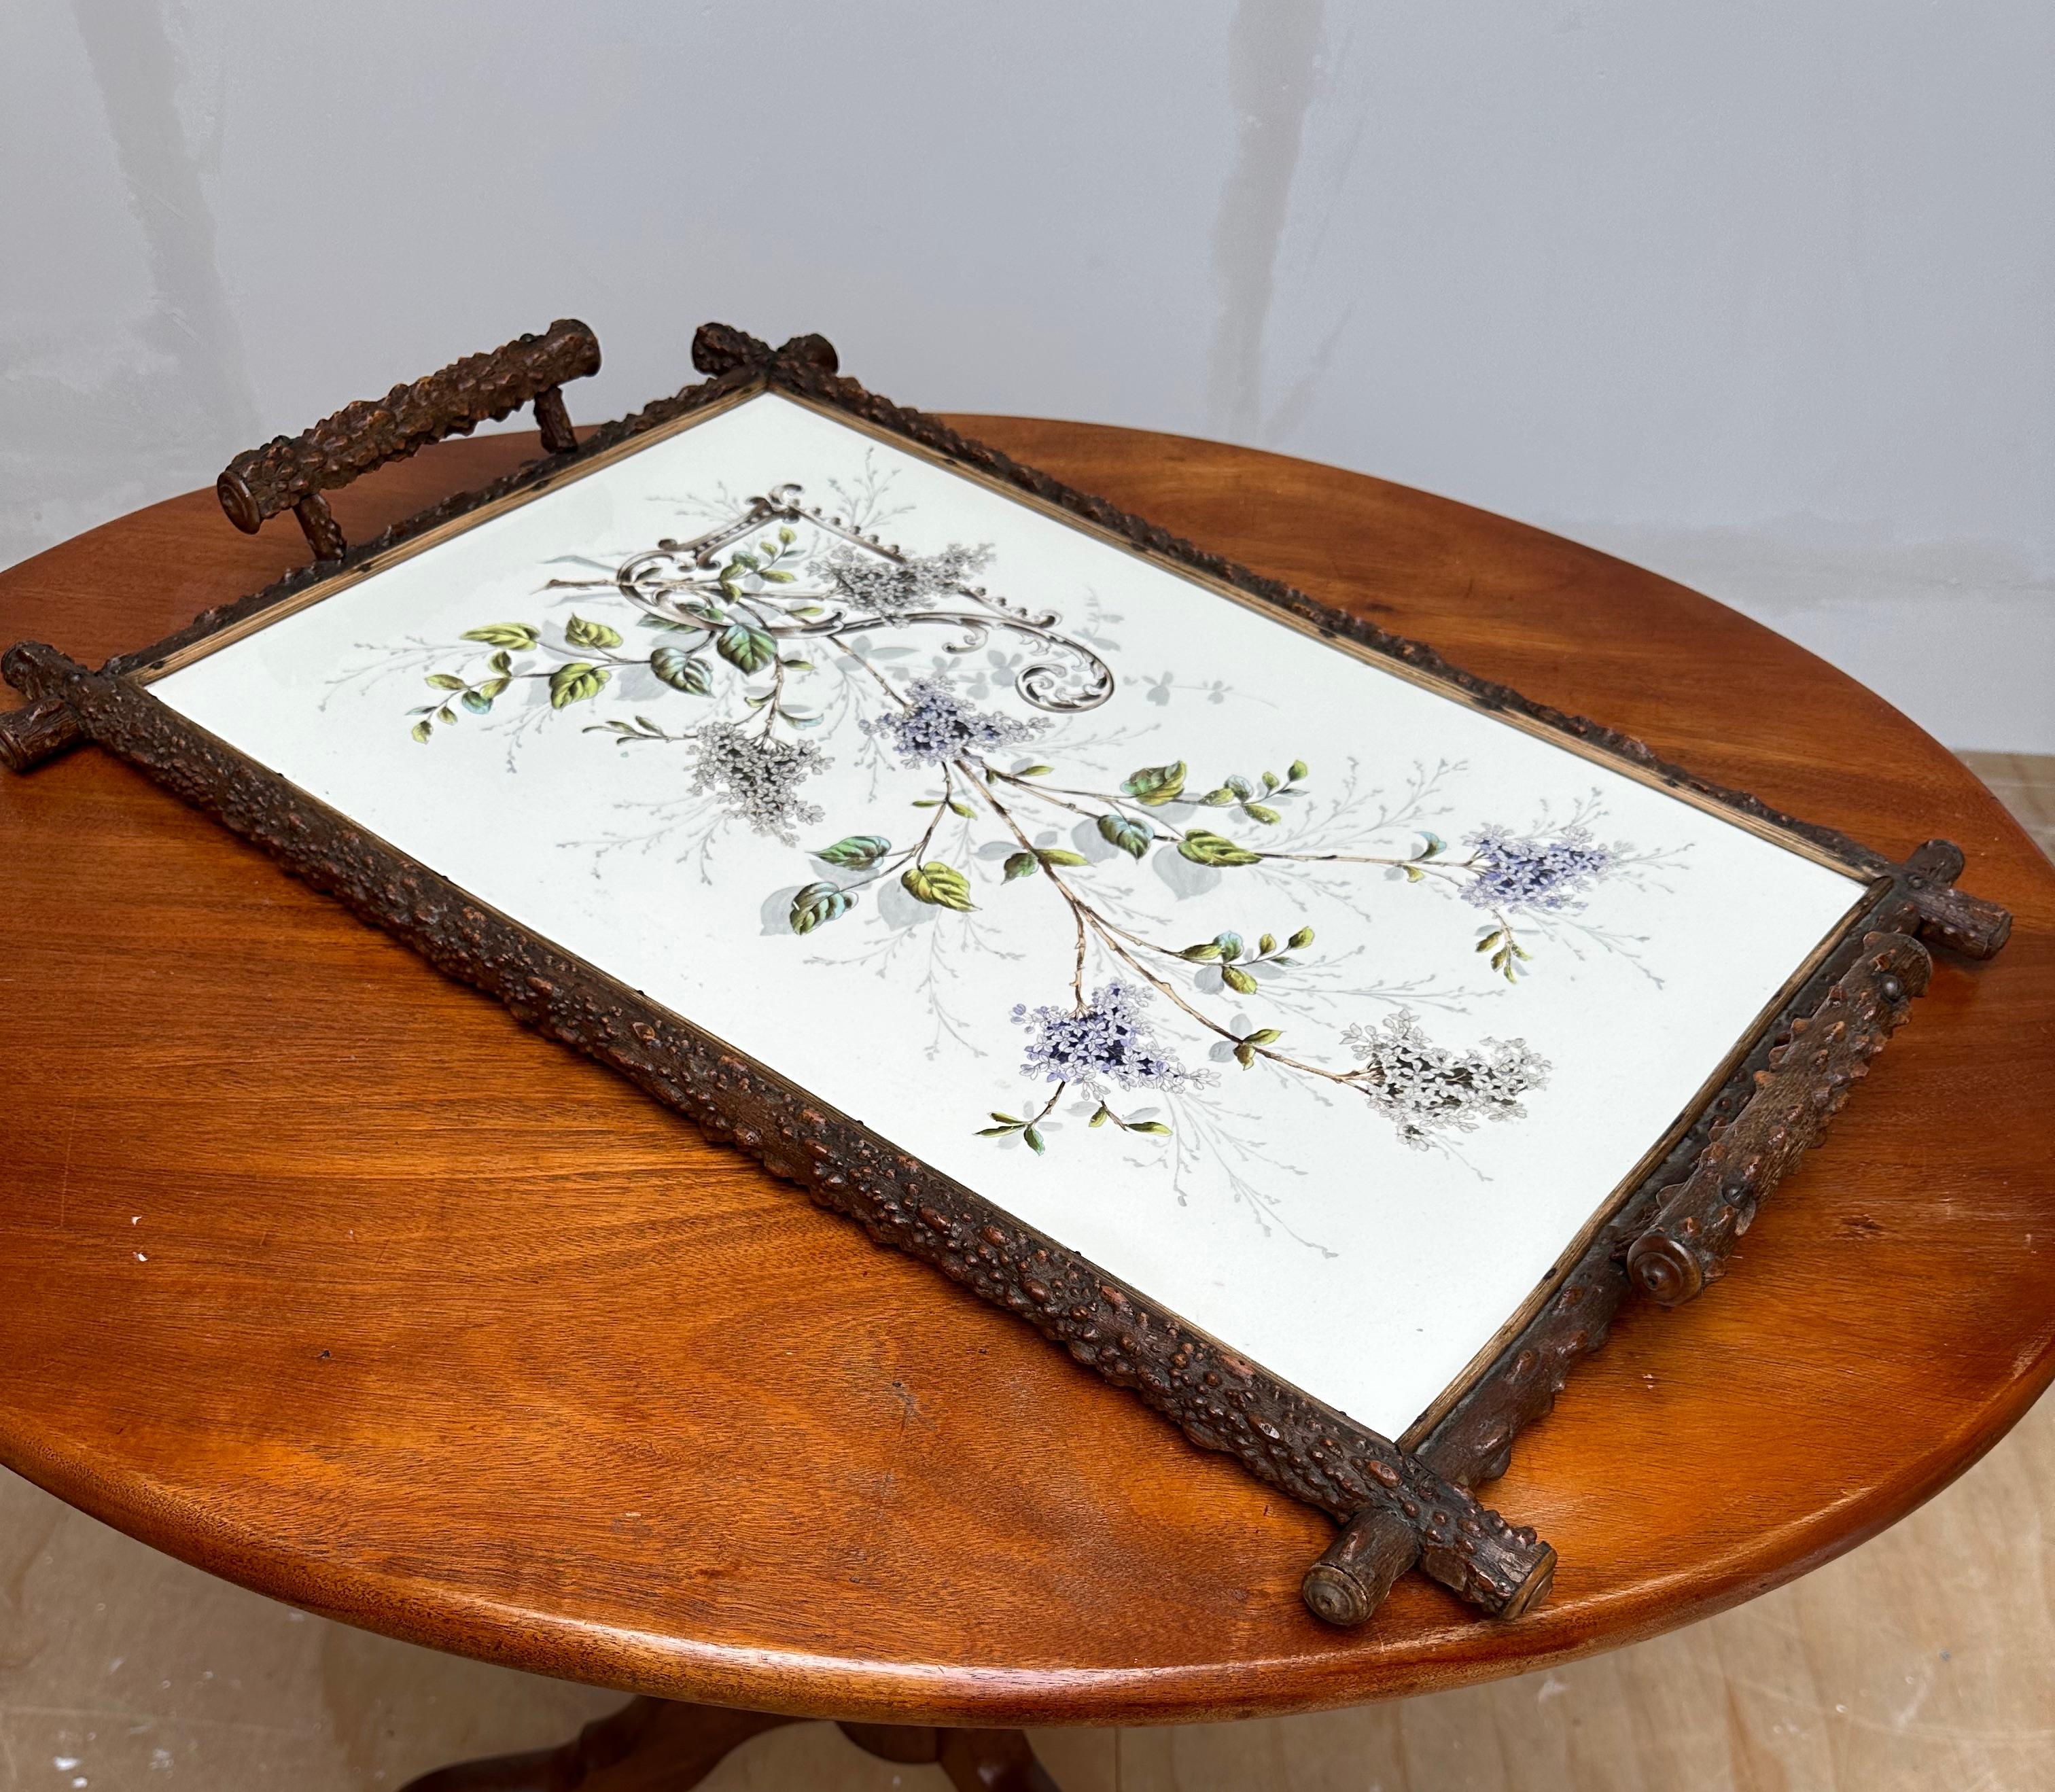 European Antique & Extra Large Arts & Crafts Hand Painted Flower Decor, Tile Serving Tray For Sale